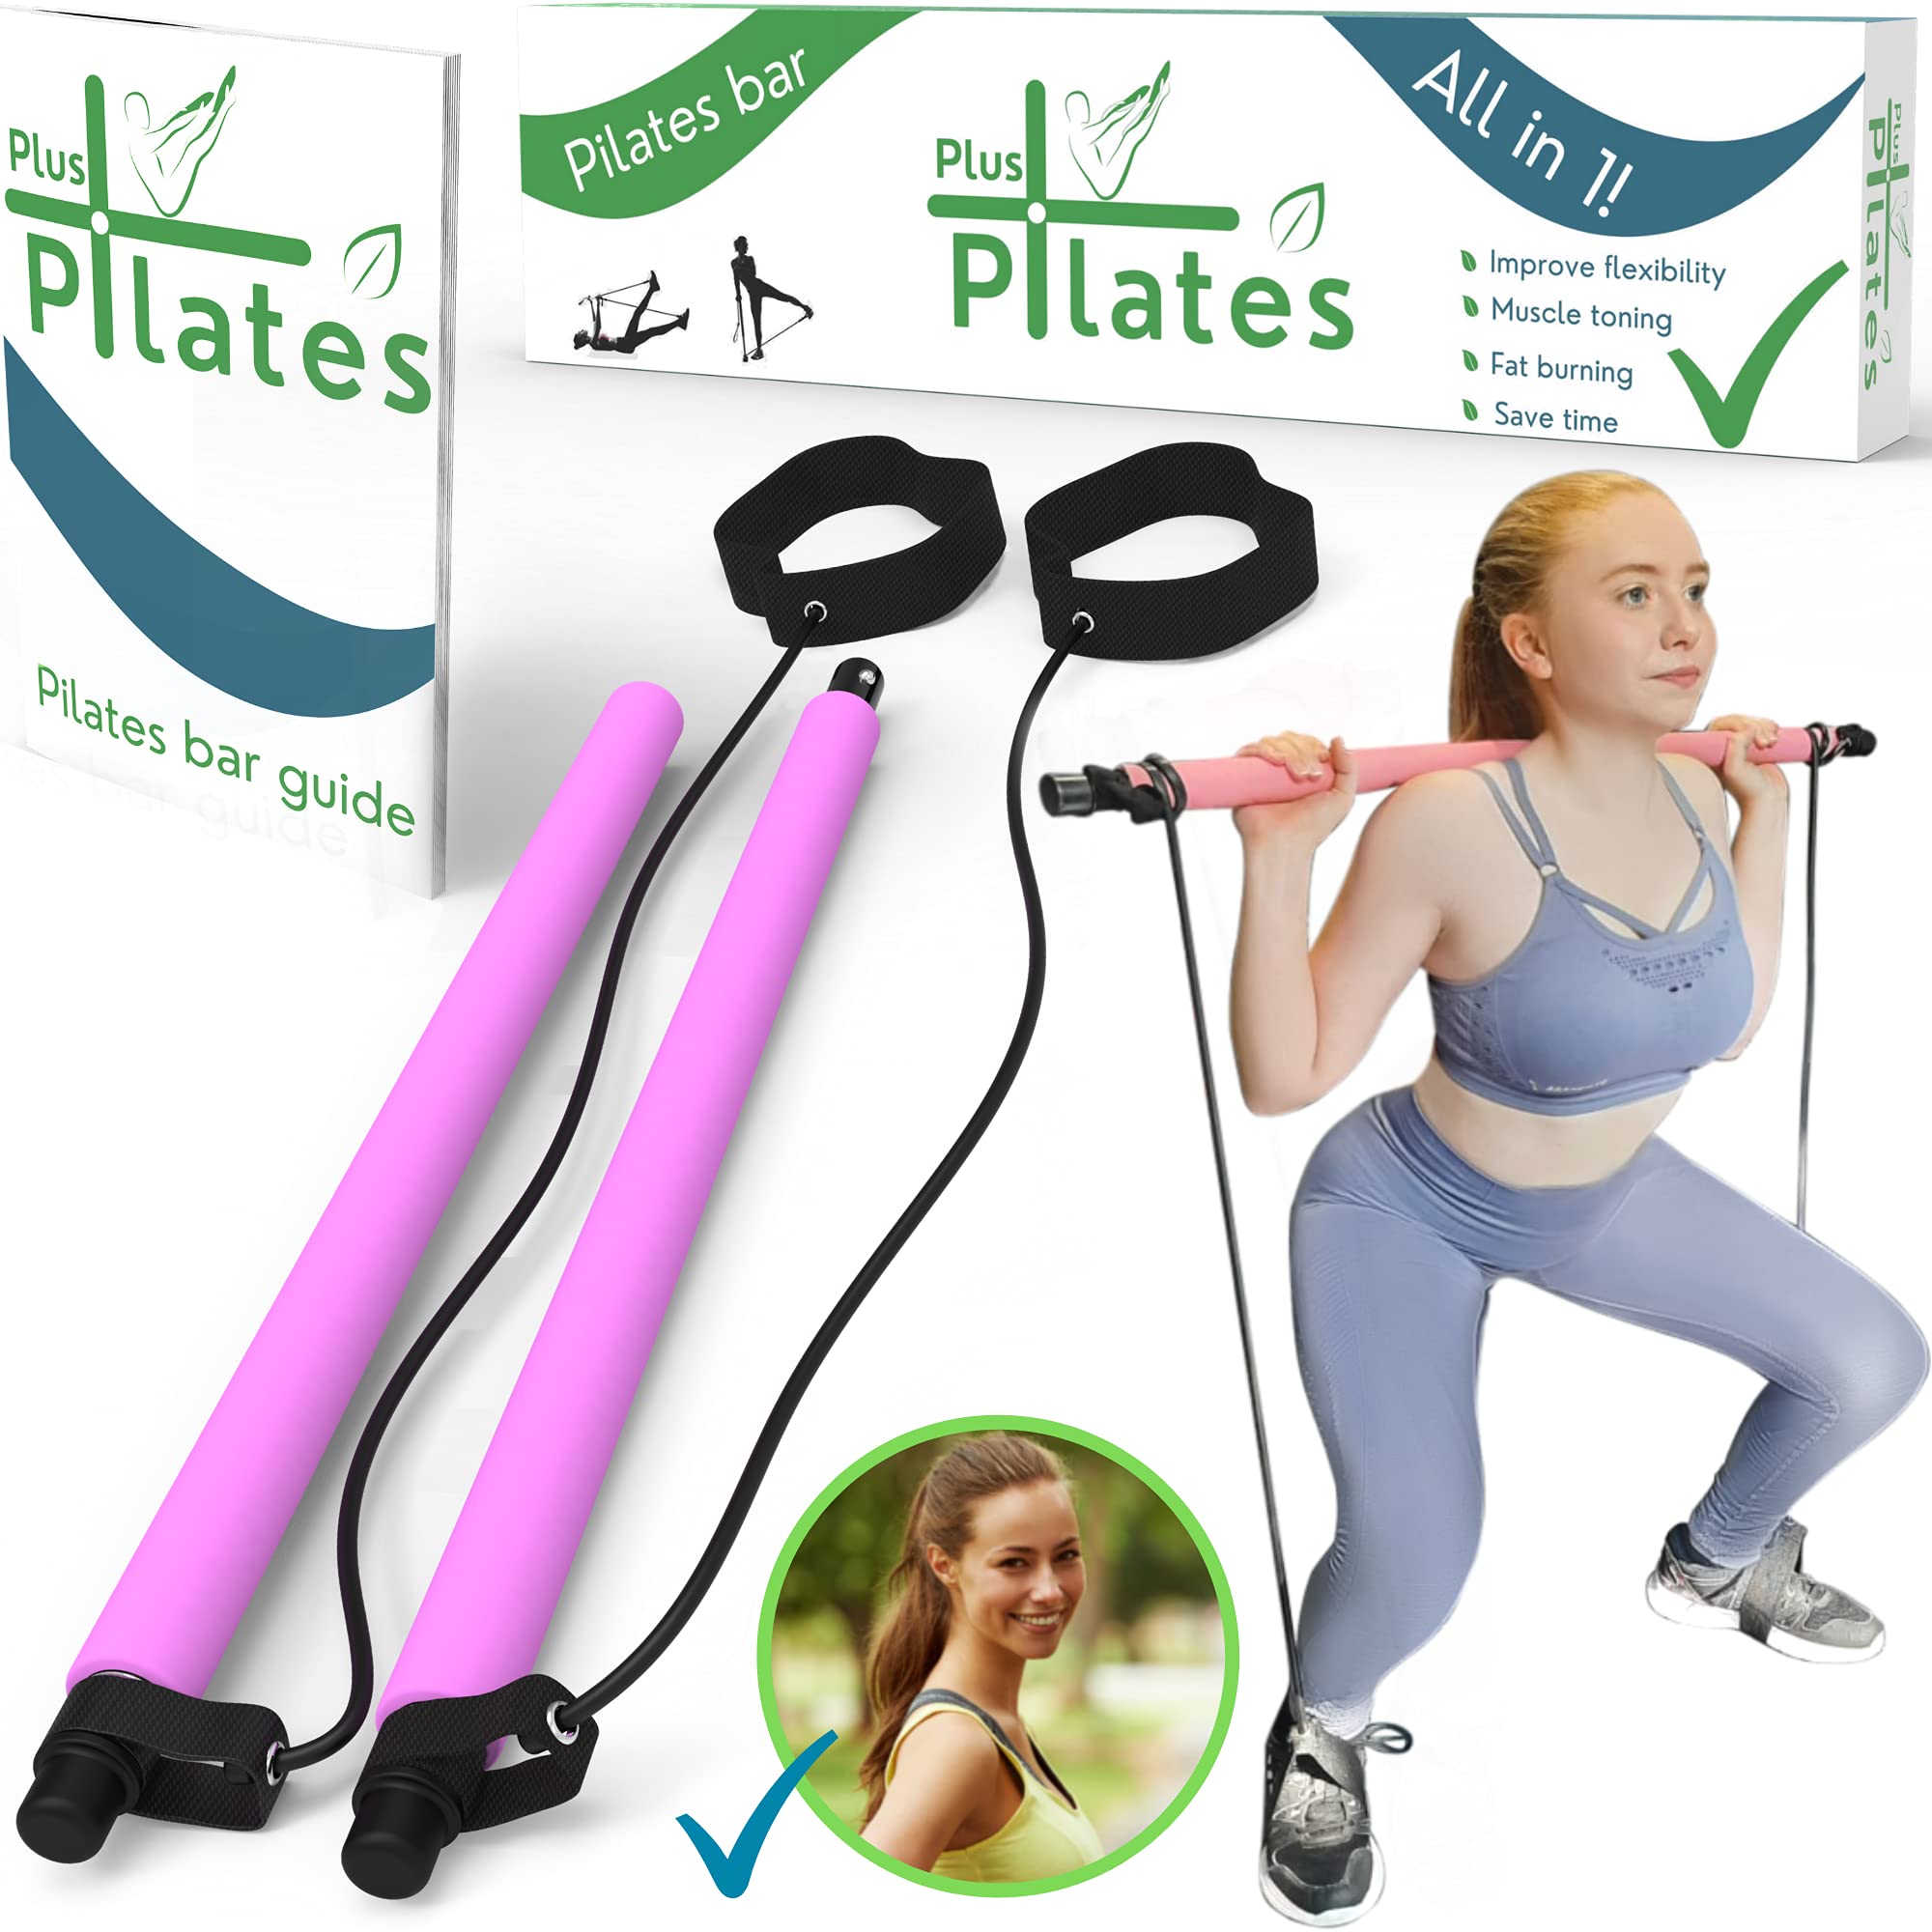 Portable Pilates Bar Kit, | Workout Bar, | Gym Equipment for Home Use, Exercise Bar, Exercise Equipment for Women, Pilates Stick, Gym Stick, Resistance Bar, Workout Stick